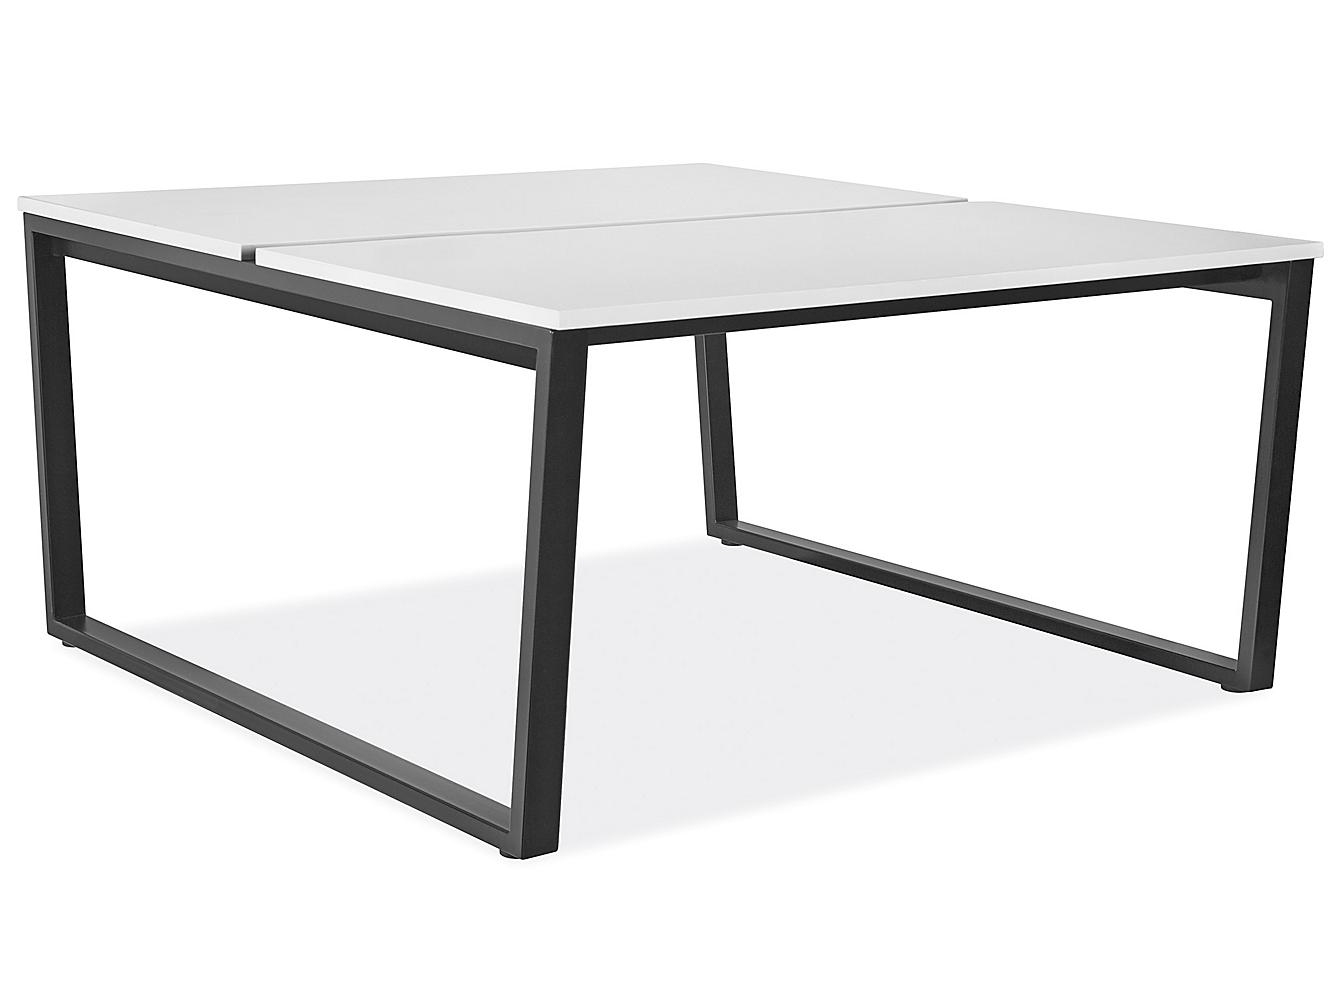 collaboration-table-dual-workstation-h-7787-uline